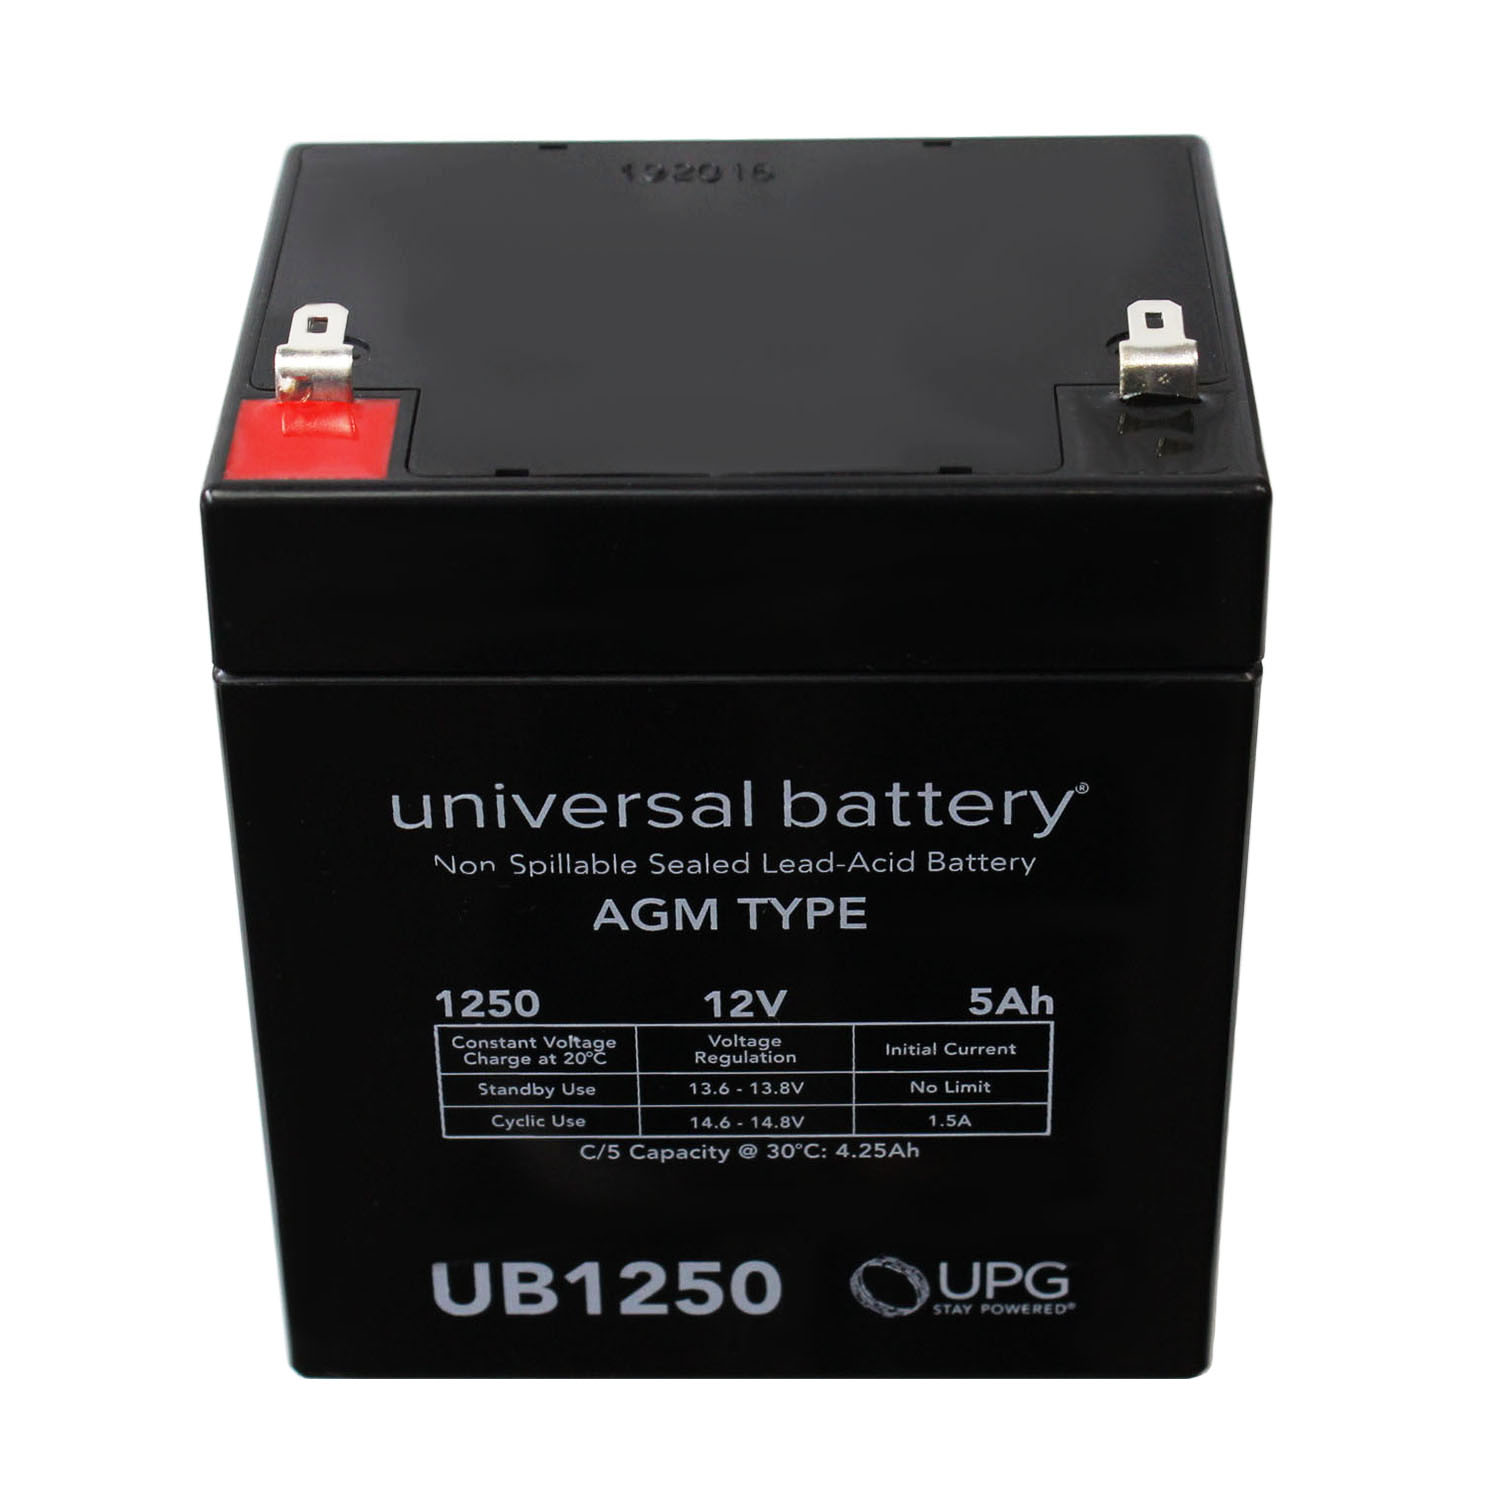 New 12V 5ah Sealed Lead Acid Battery Replacement for ADEMCO Alarm System - image 3 of 6